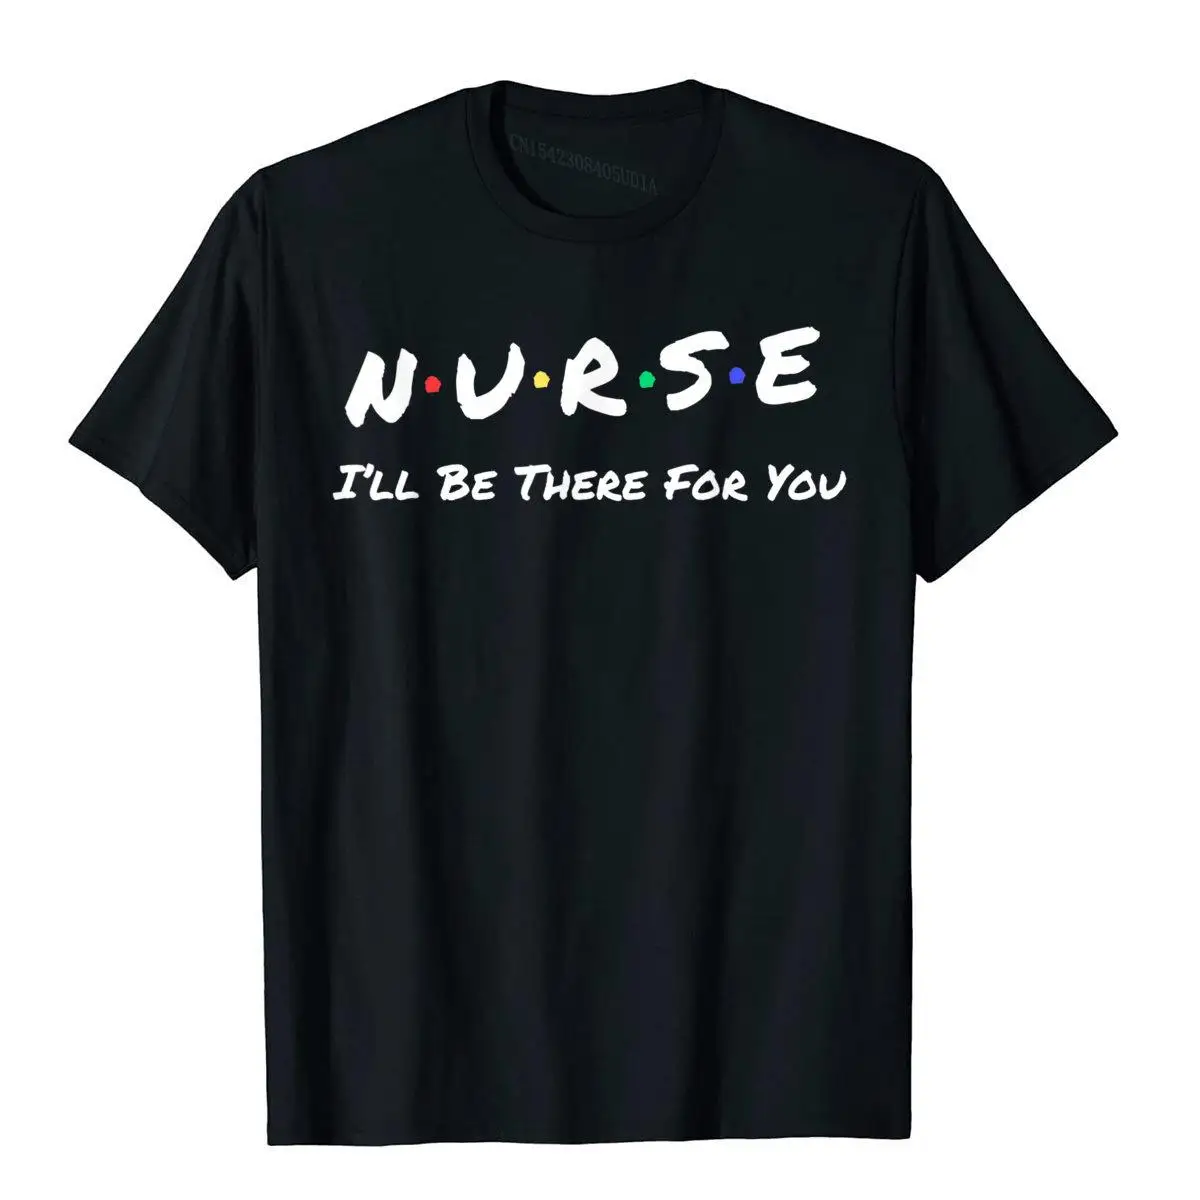 

Nurse I'll Be There For You Throwback Good Friend T-Shirt Cotton Men Tees 3D Style Top T-Shirts Camisa Hip Hop